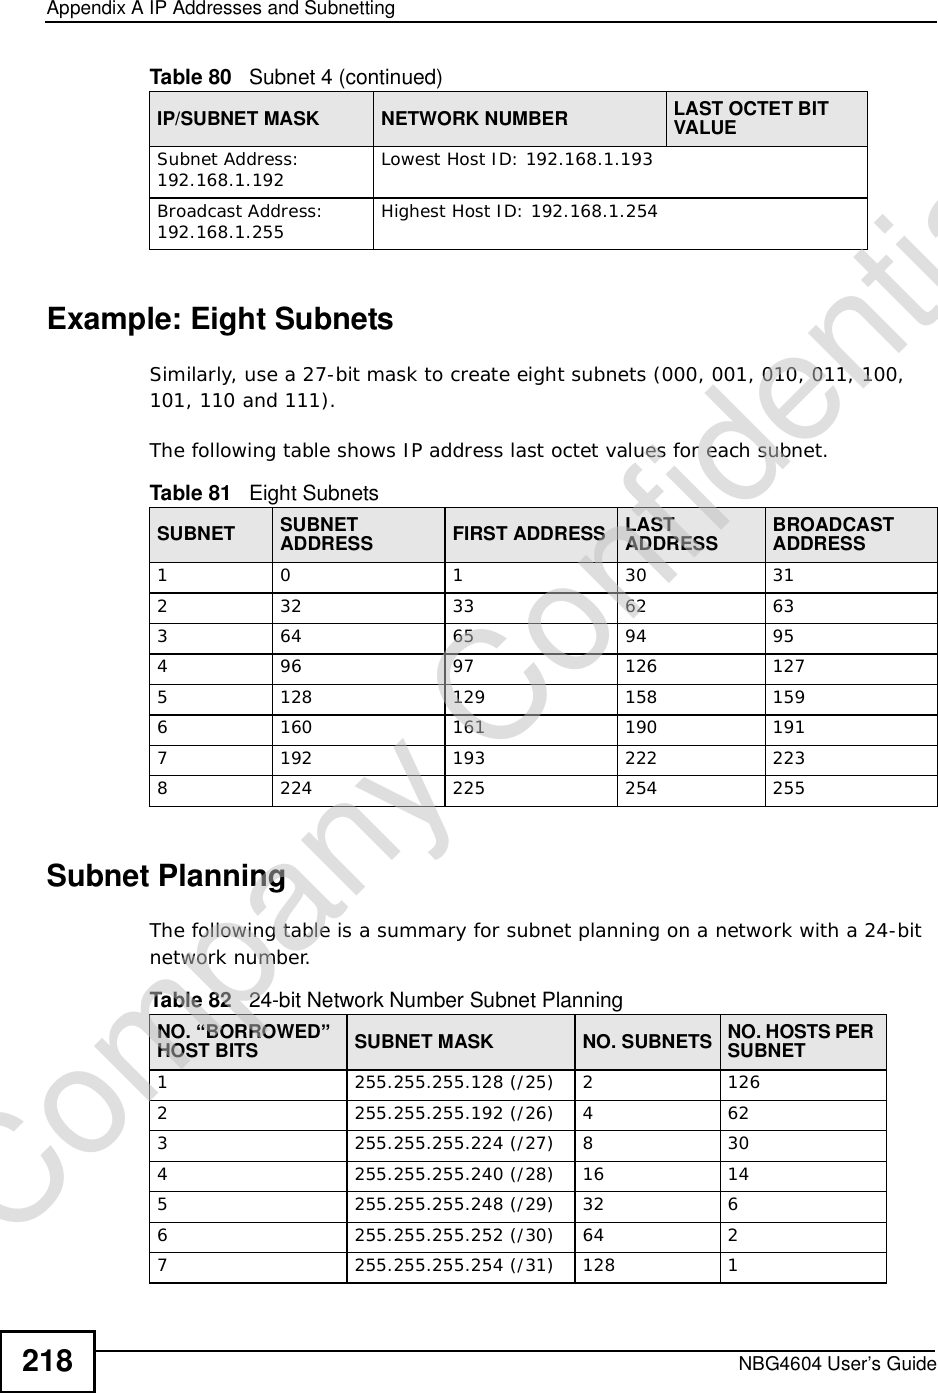 Appendix AIP Addresses and SubnettingNBG4604 User’s Guide218Example: Eight SubnetsSimilarly, use a 27-bit mask to create eight subnets (000, 001, 010, 011, 100, 101, 110 and 111). The following table shows IP address last octet values for each subnet.Subnet PlanningThe following table is a summary for subnet planning on a network with a 24-bit network number.Subnet Address: 192.168.1.192 Lowest Host ID: 192.168.1.193Broadcast Address: 192.168.1.255 Highest Host ID: 192.168.1.254Table 80   Subnet 4 (continued)IP/SUBNET MASK NETWORK NUMBER LAST OCTET BIT VALUETable 81   Eight SubnetsSUBNET SUBNET ADDRESS FIRST ADDRESS LAST ADDRESS BROADCAST ADDRESS10130 312 32 33 62 633 64 65 94 954 96 97 126 1275 128 129 158 1596 160 161 190 1917 192 193 222 2238 224 225 254 255Table 82   24-bit Network Number Subnet PlanningNO. “BORROWED” HOST BITS SUBNET MASK NO. SUBNETS NO. HOSTS PER SUBNET1255.255.255.128 (/25) 2 1262 255.255.255.192 (/26) 4 623 255.255.255.224 (/27) 8 304 255.255.255.240 (/28) 16 145 255.255.255.248 (/29) 32 66 255.255.255.252 (/30) 64 27 255.255.255.254 (/31) 128 1Company Confidential